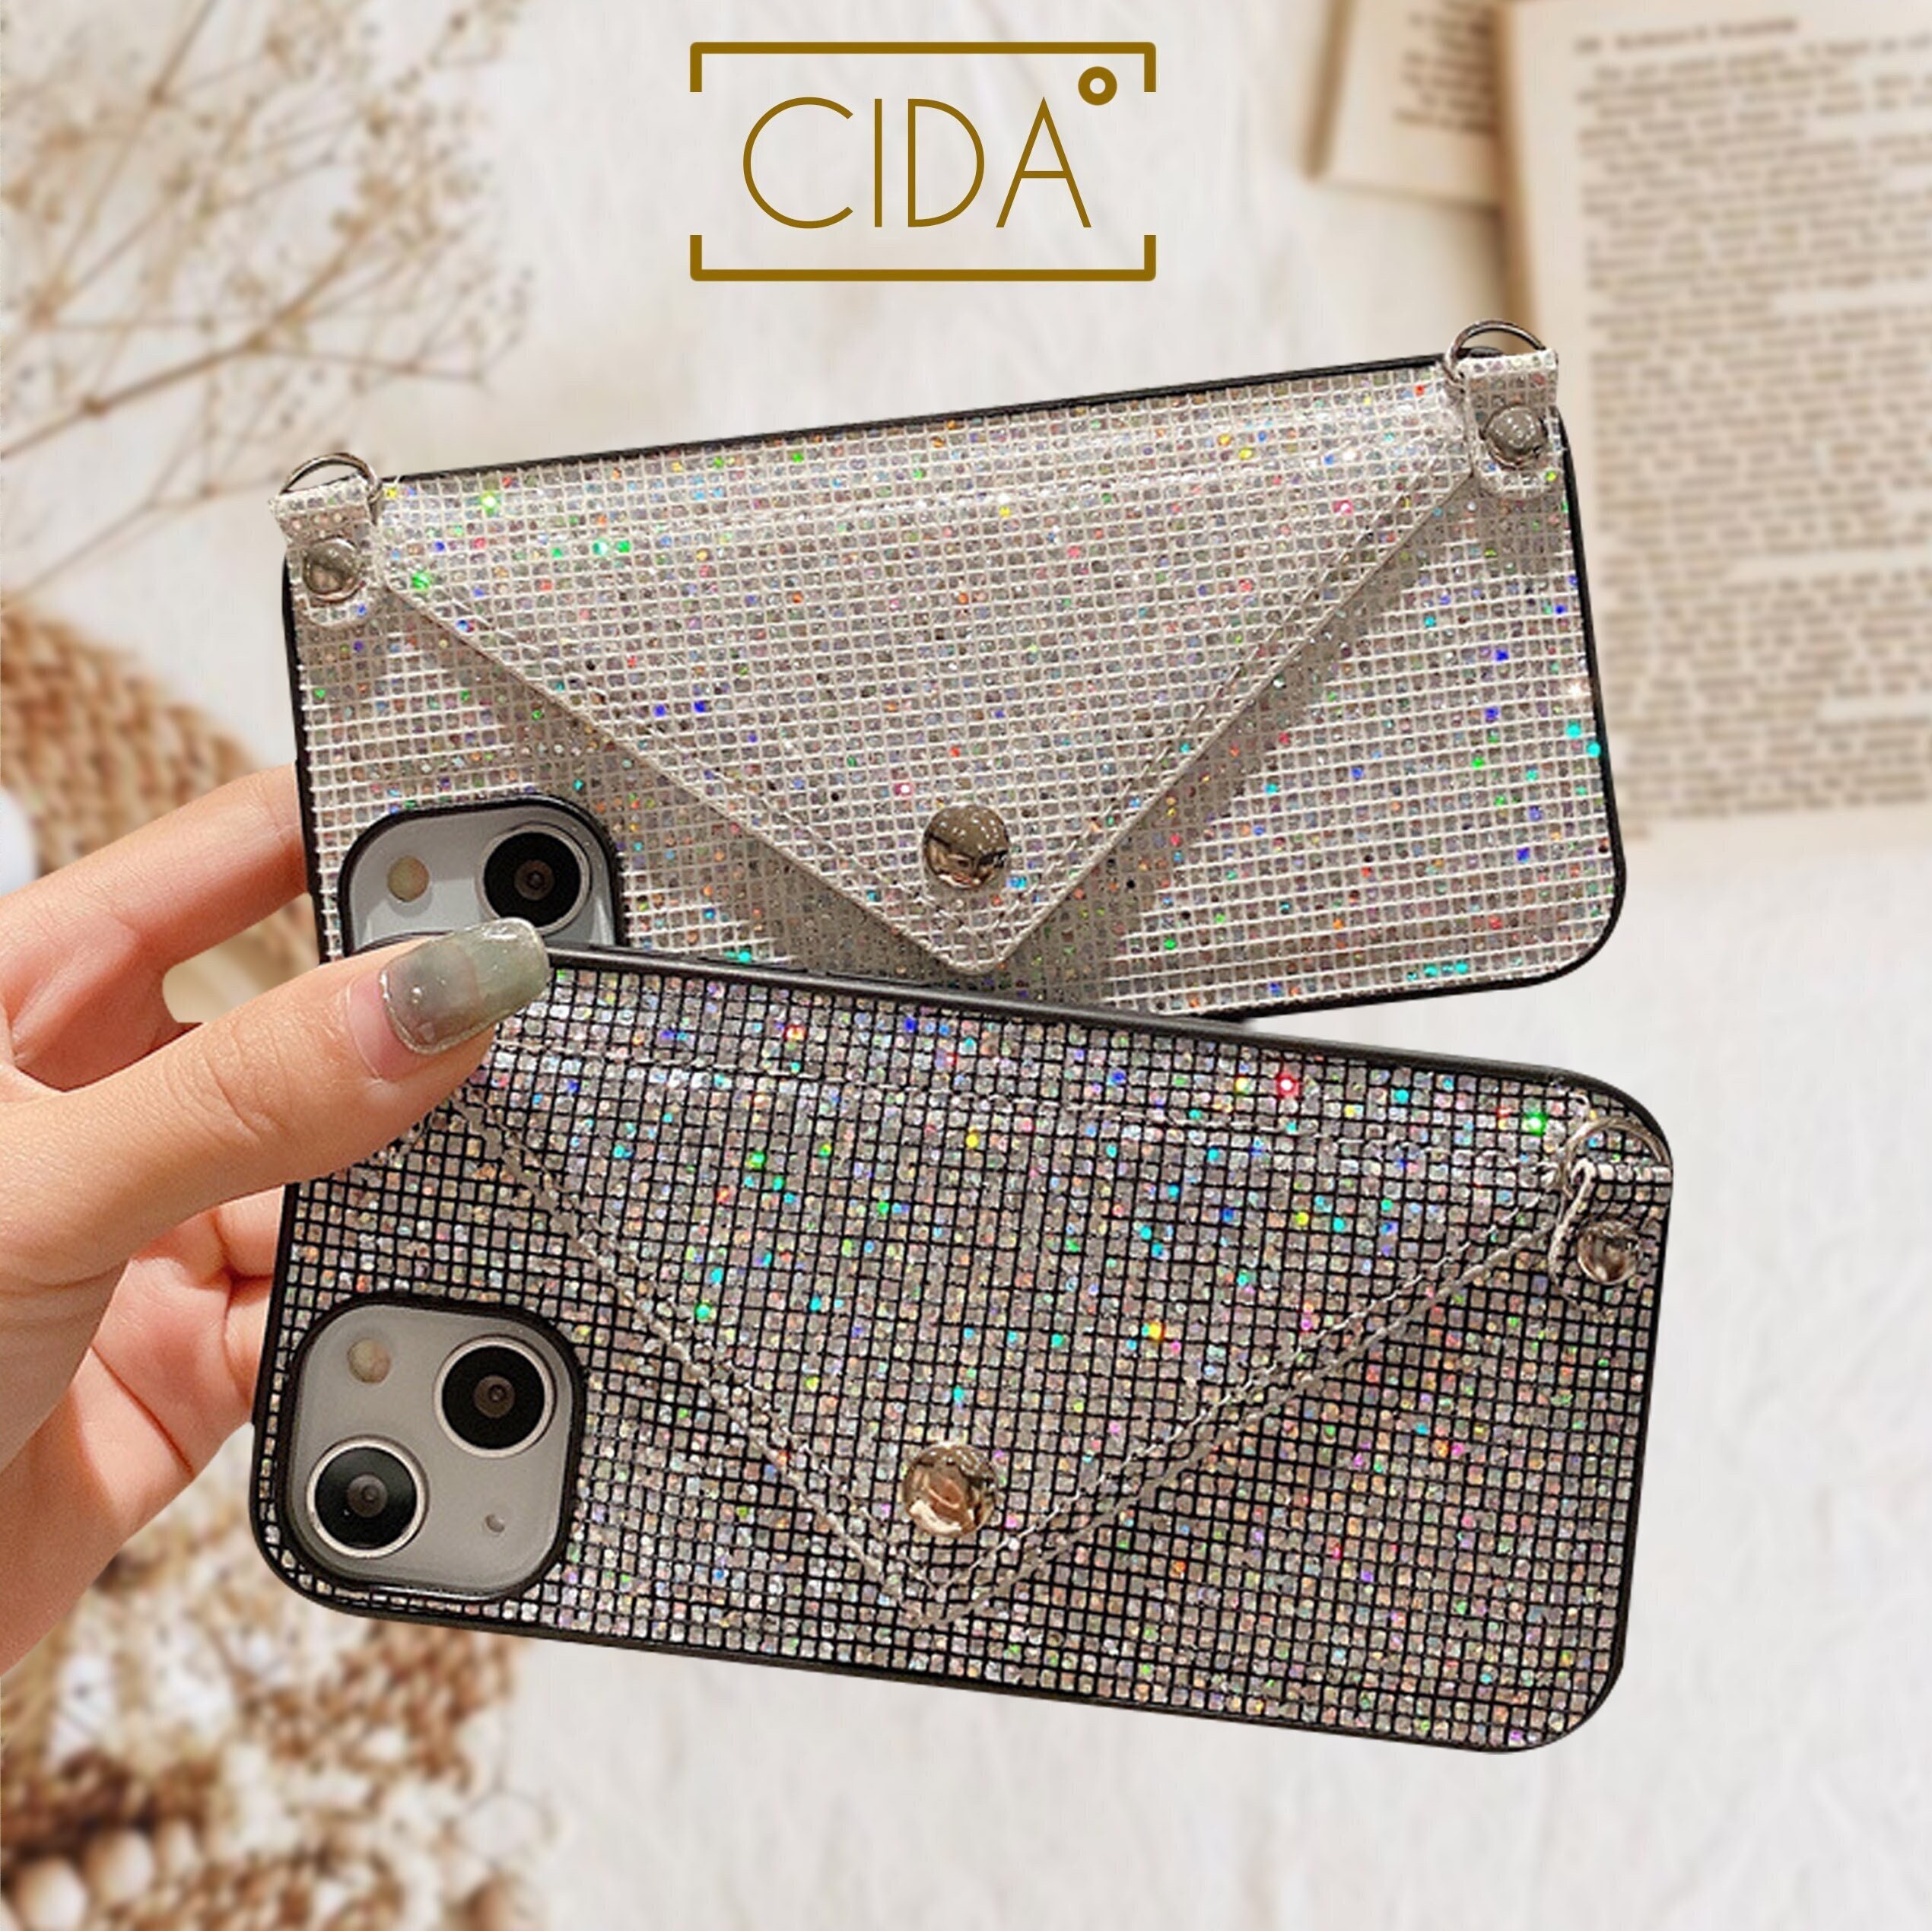 aowner Compatible with iPhone 12 Pro Max Bling Stand Holder Case Luxury Hand Strap Glitter Sparkle Diamond Bee Wrist Bracket for Woman Girls